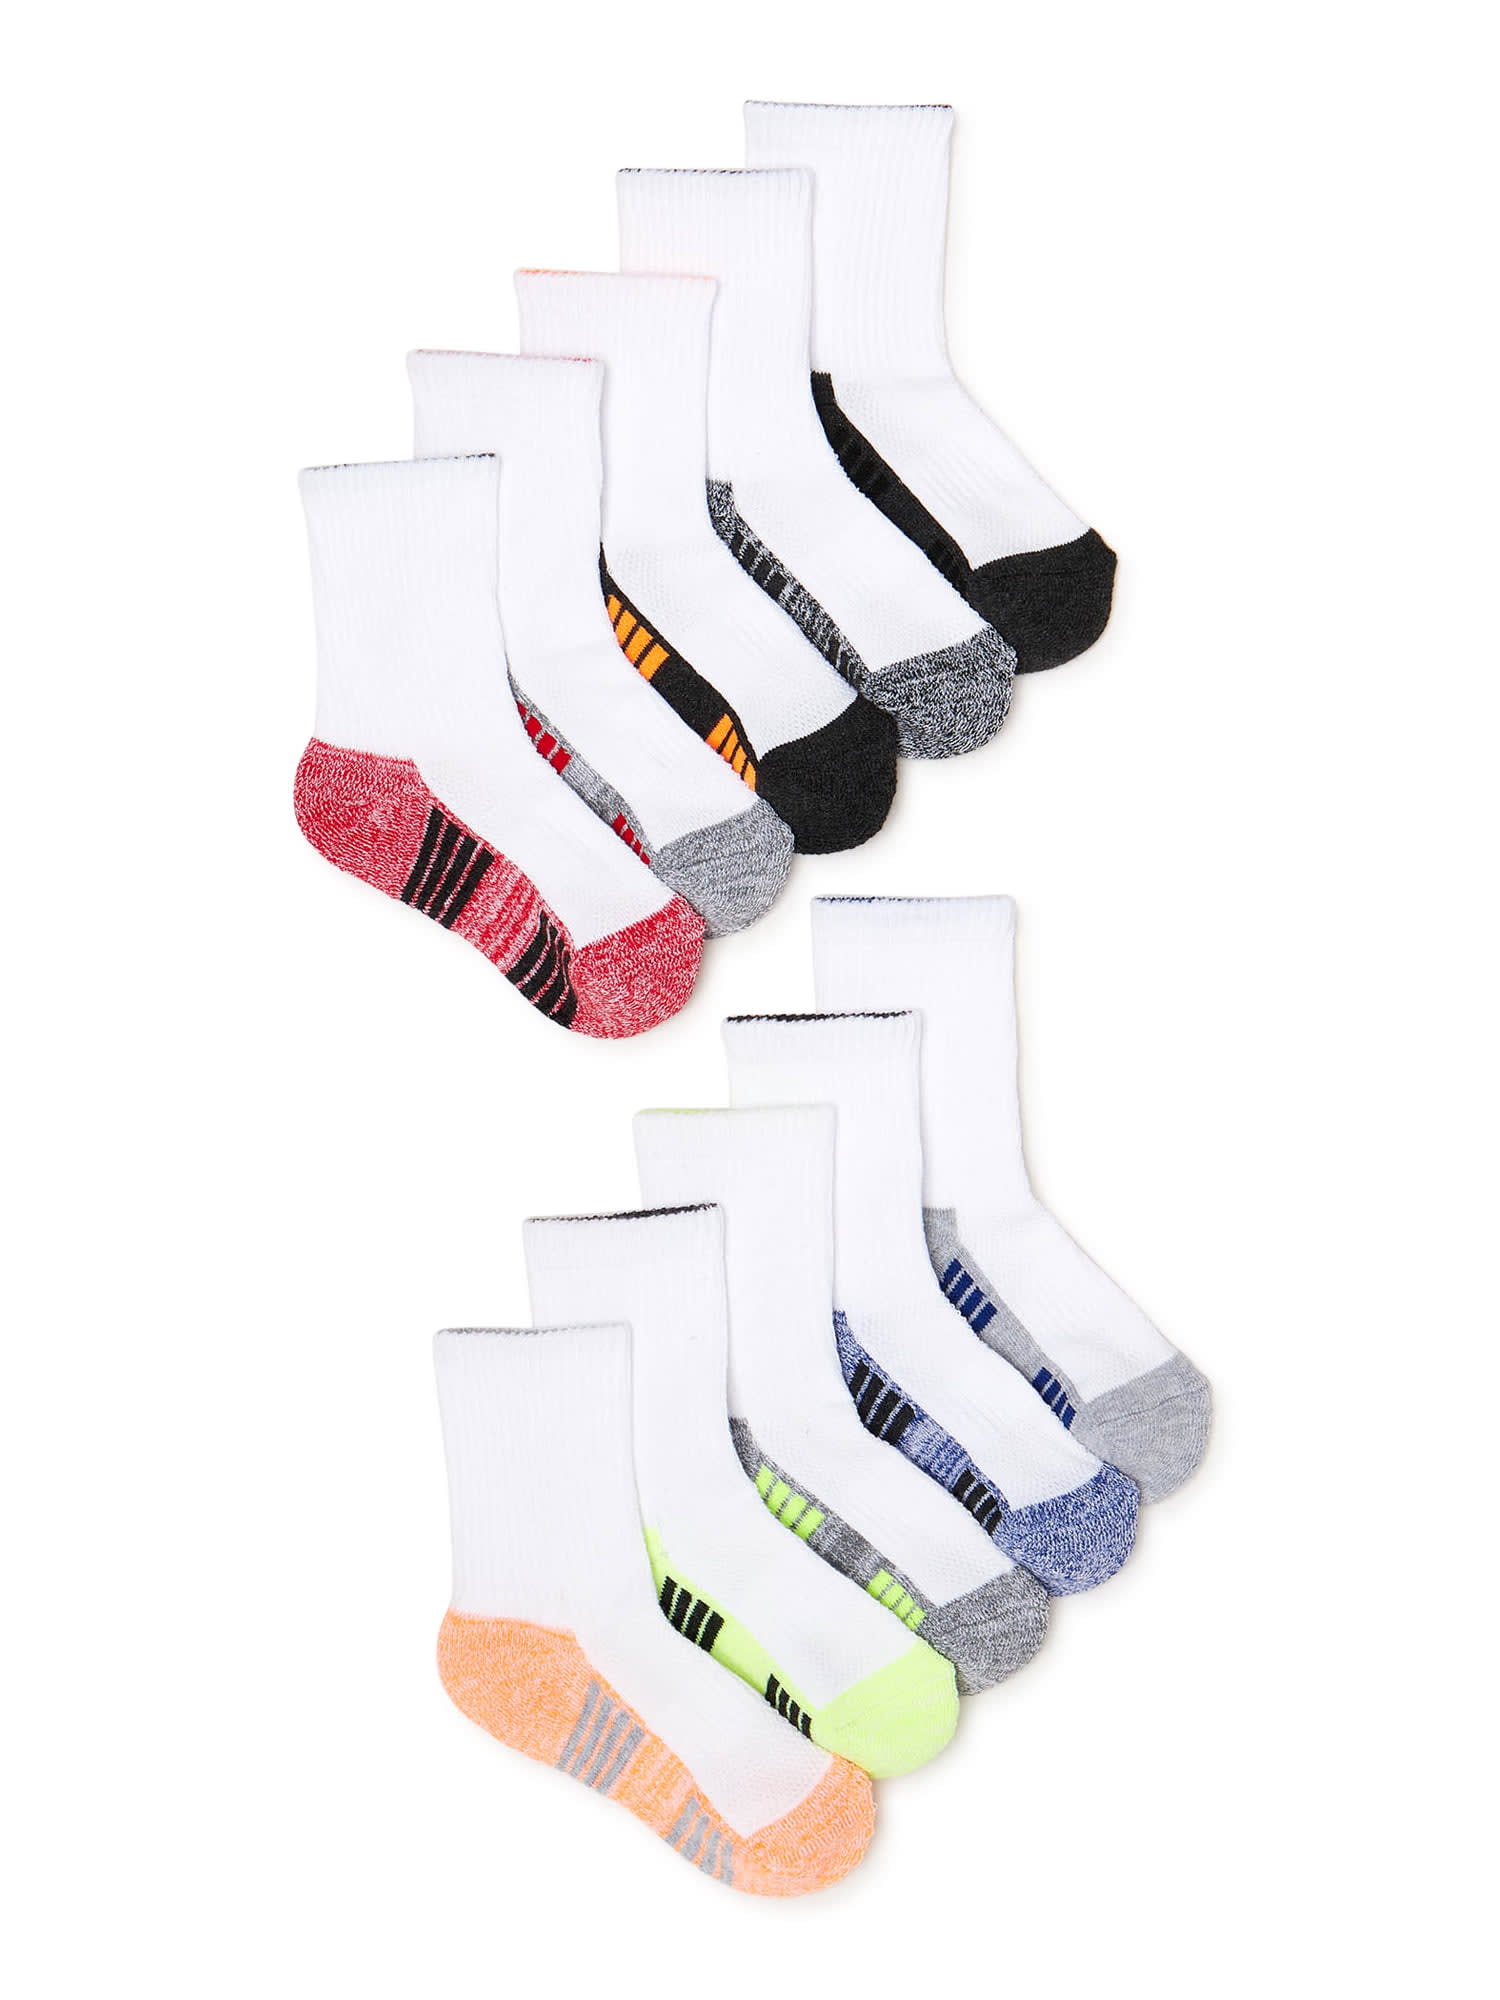 Athletic Works Boys Cushioned Crew Socks, 10-Pack S (4-8.5) - L (3-9) -  DroneUp Delivery